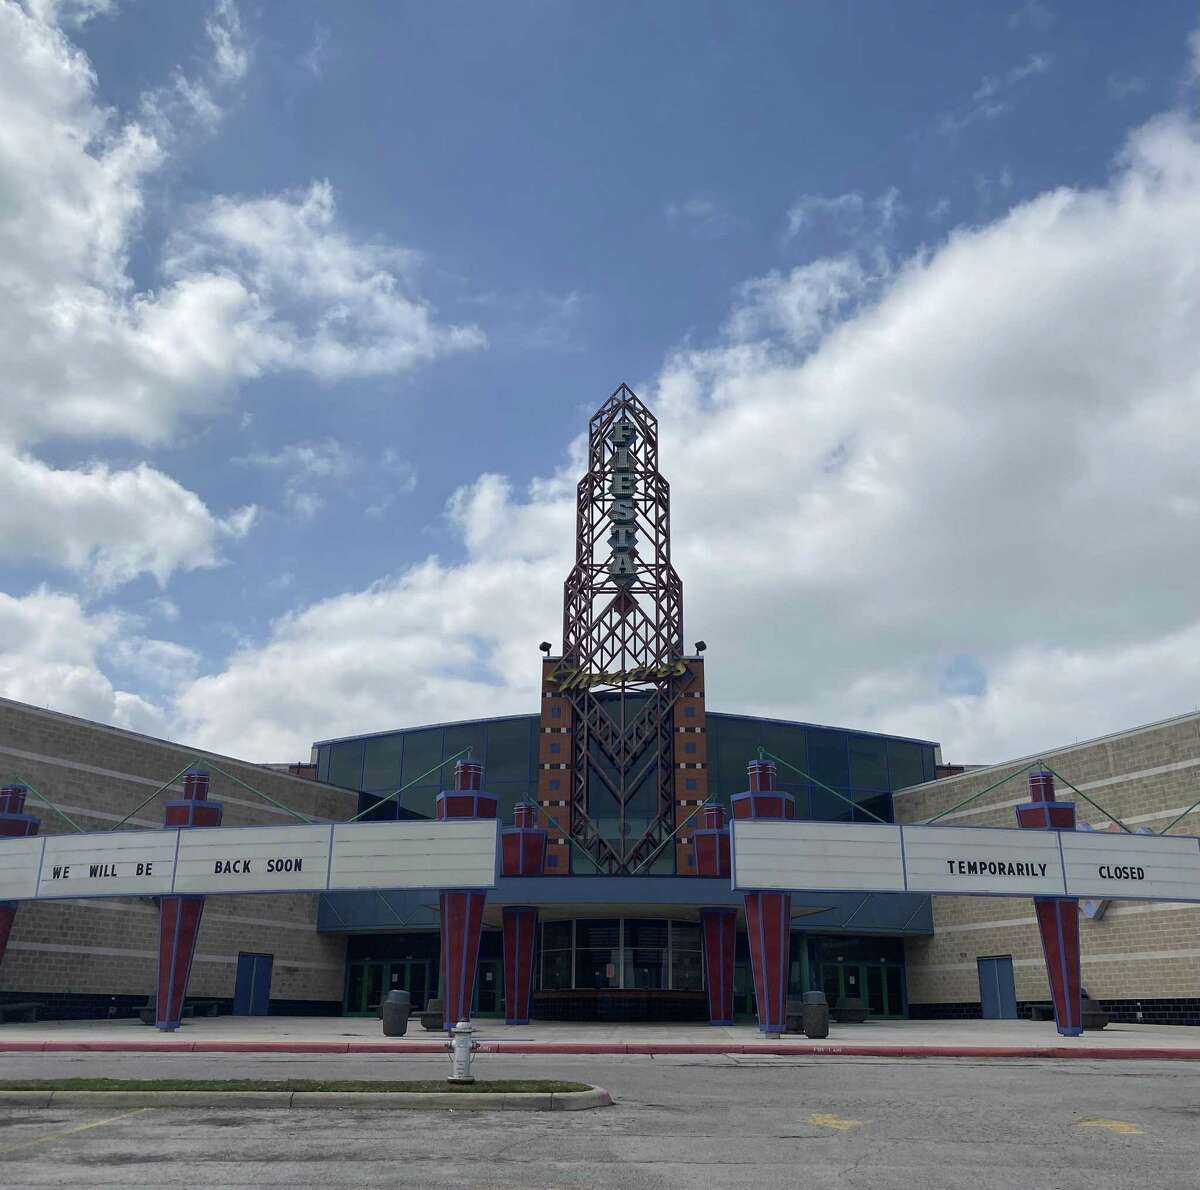 The Regal Fiesta Stadium 16 at 12631 Vance Jackson Road is permanently closed.